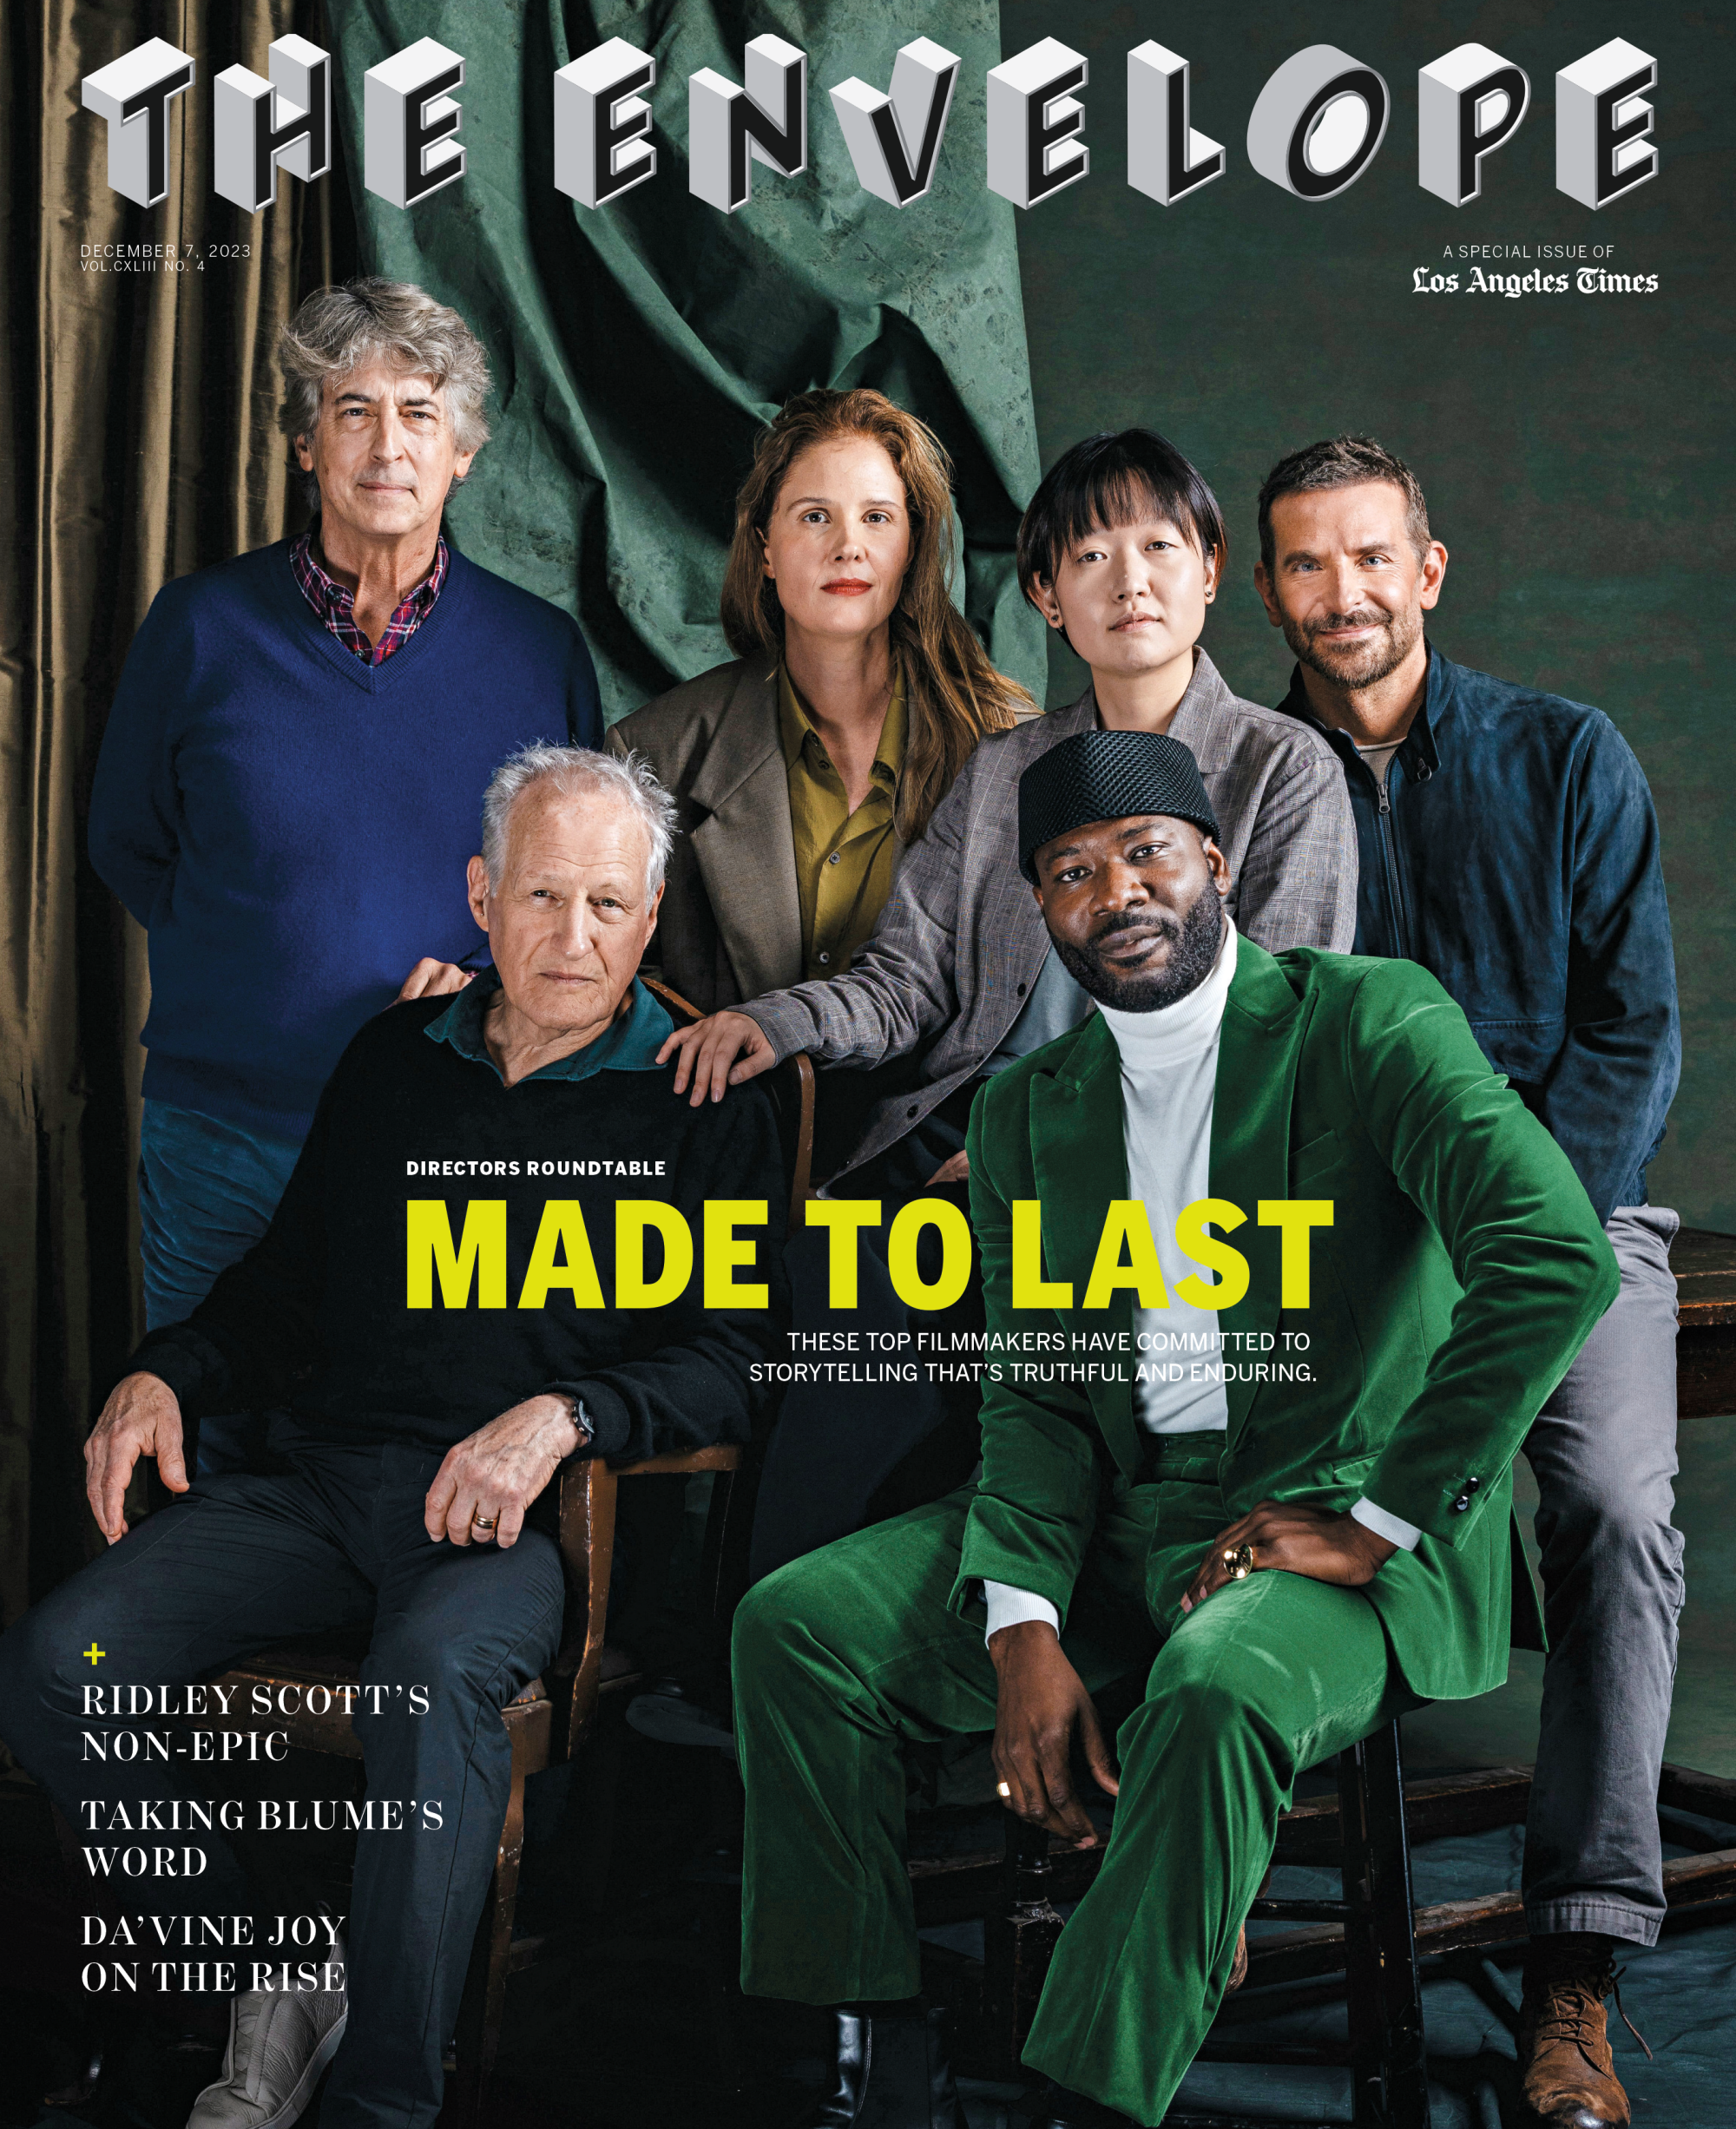 The Envelope Directors Roundtable cover image